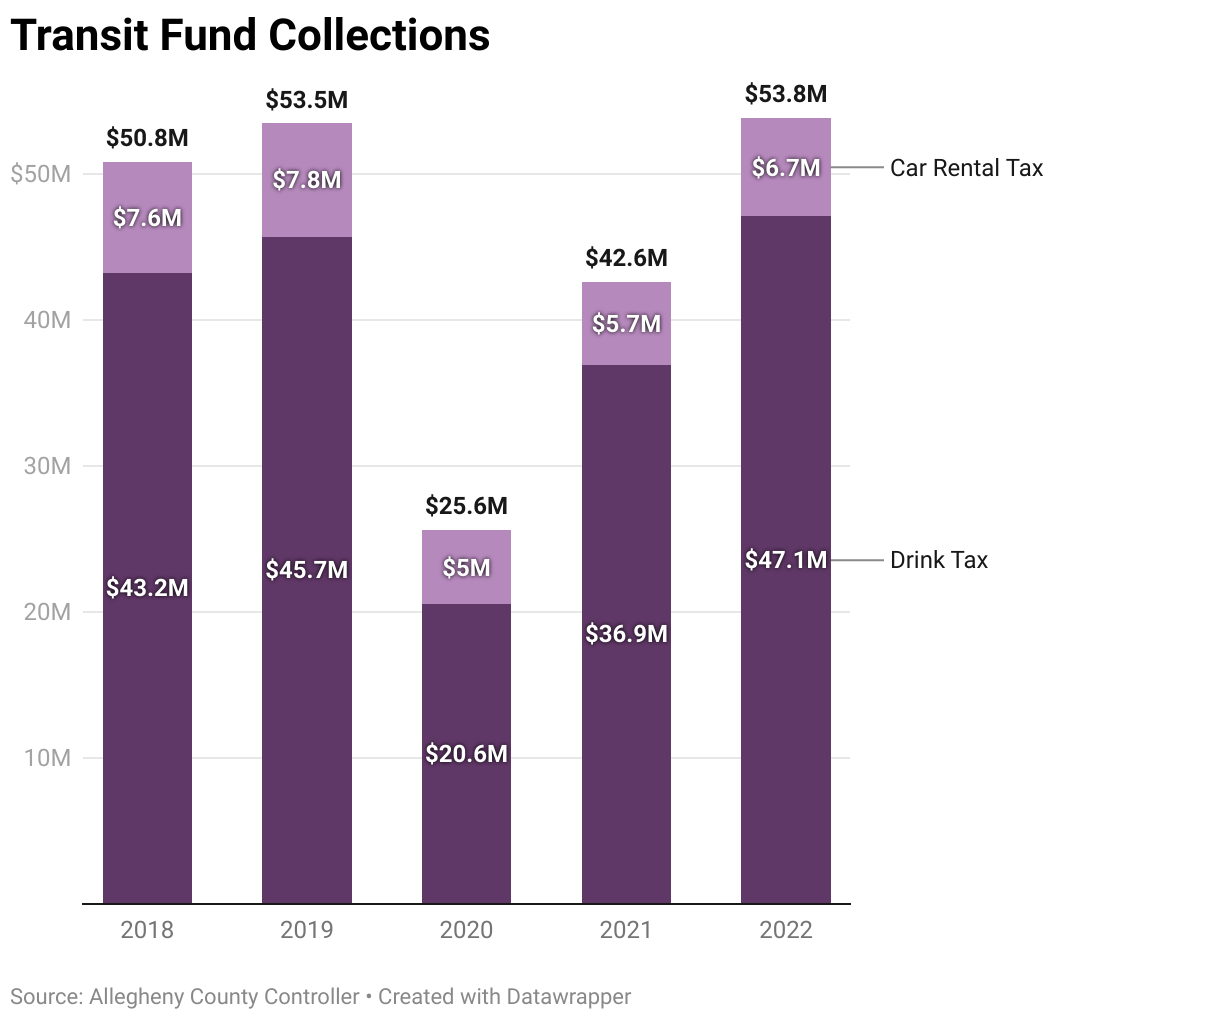 Stacked bar chart showing Transit Fund collection amounts from 2018 to 2022, broken down by tax source.